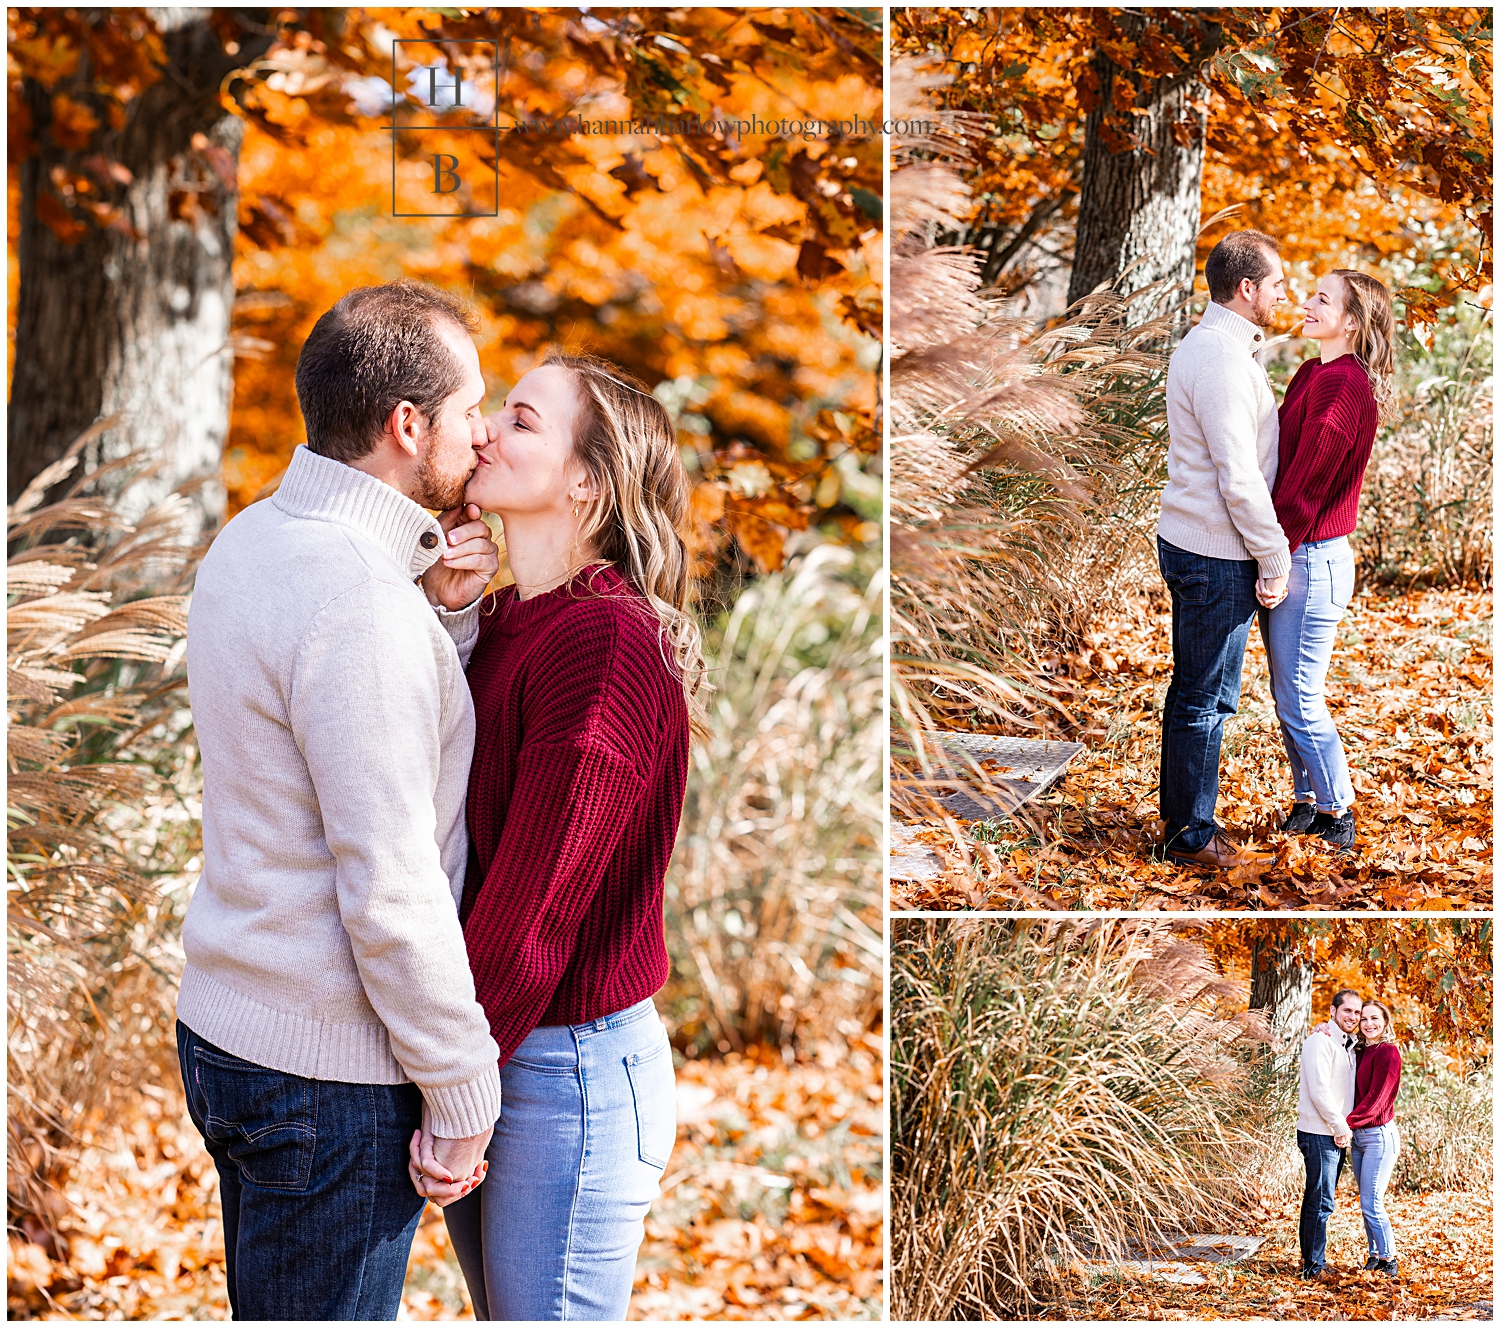 Man kisses fiancé in fall foliage with tall grass